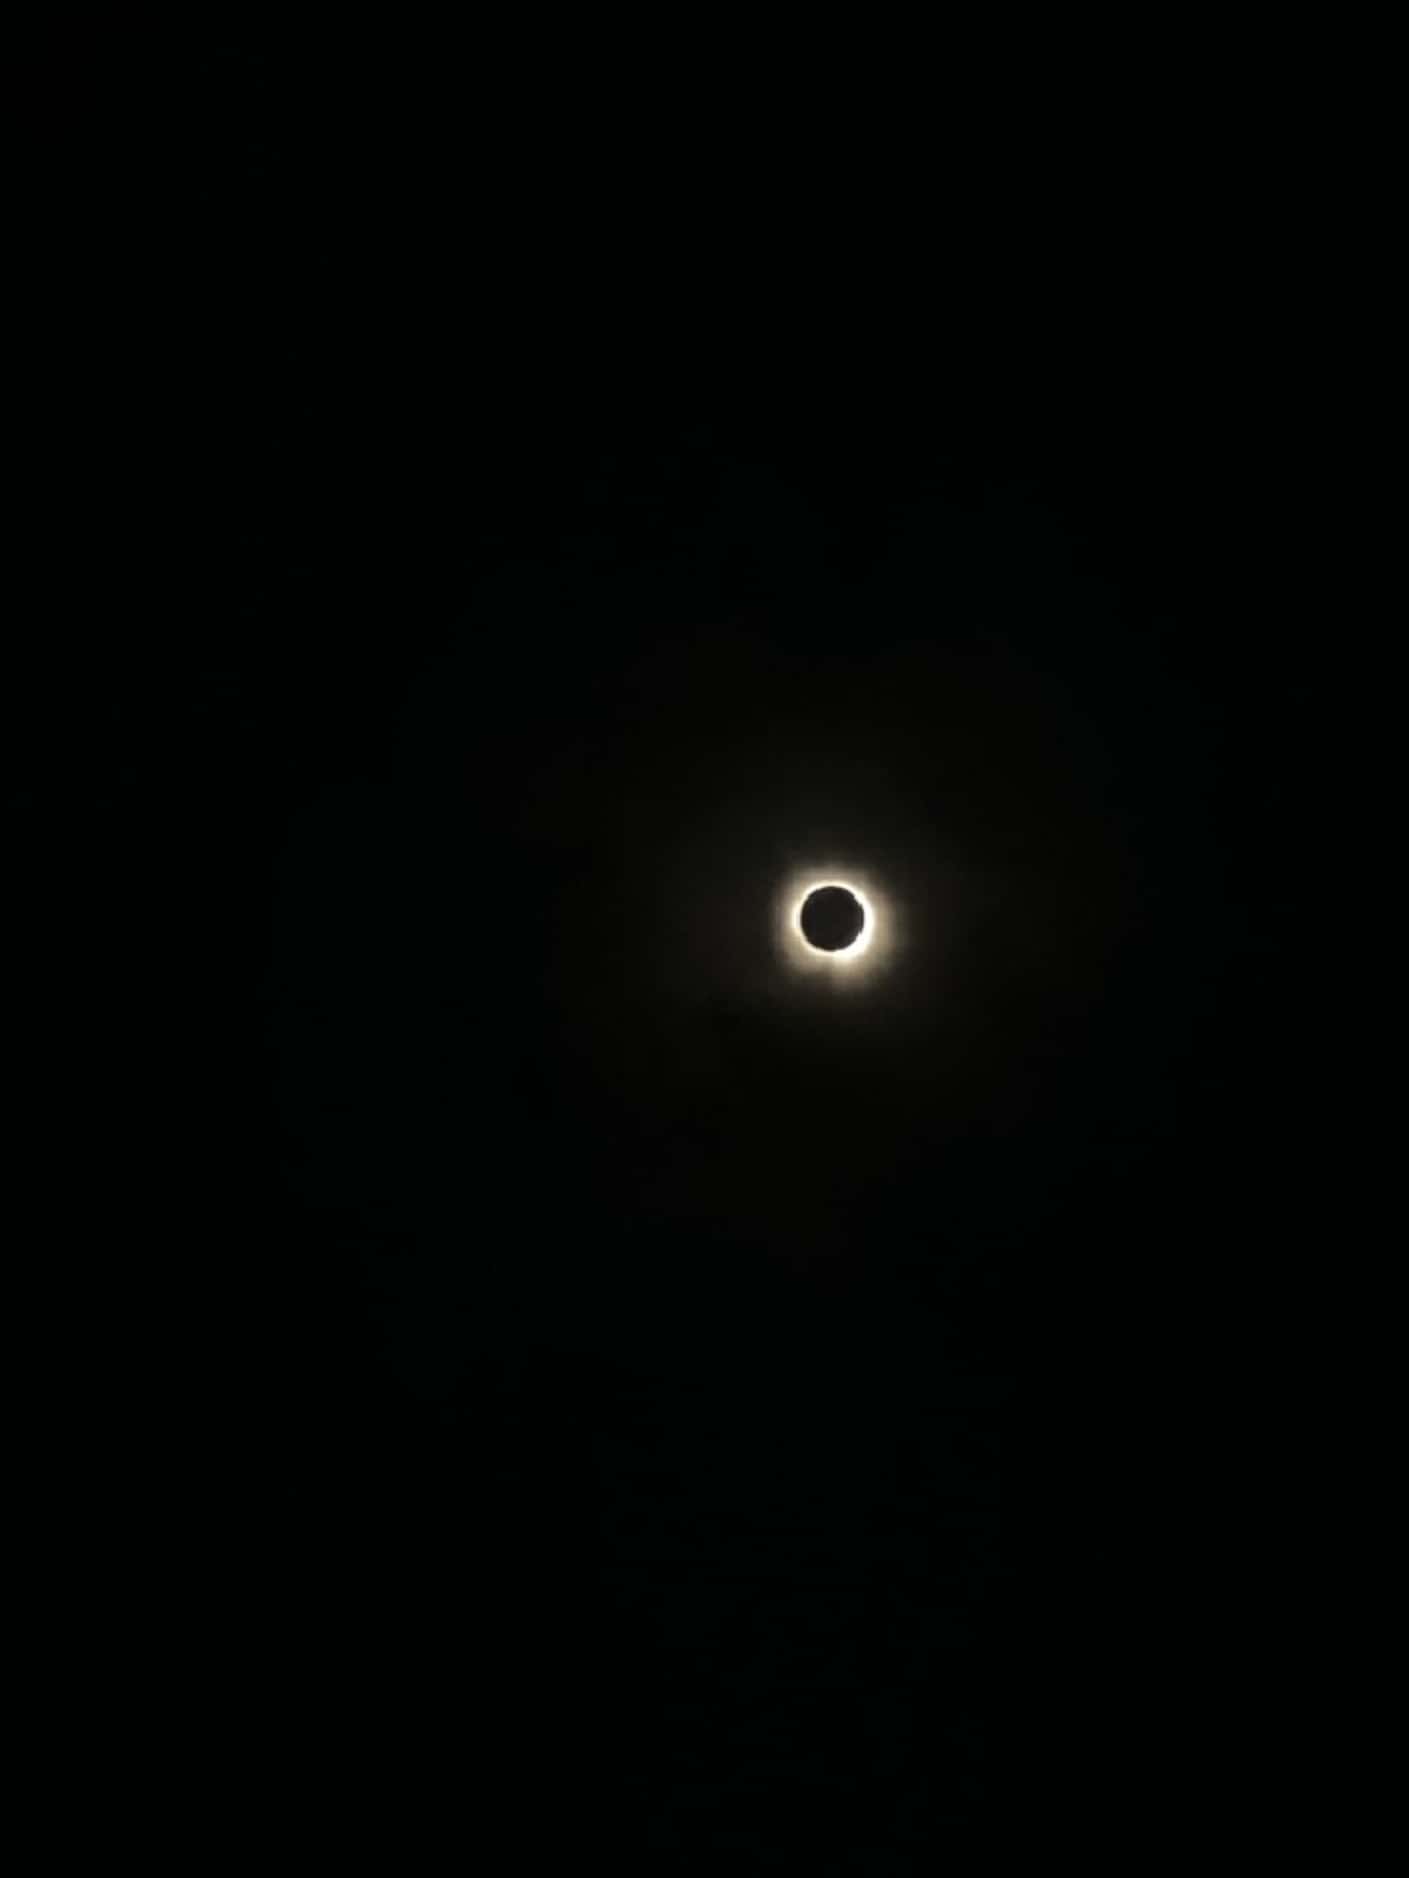 The eclipse is seen at Breckinridge Park in Garland, Texas. Provided by Ryan Walters